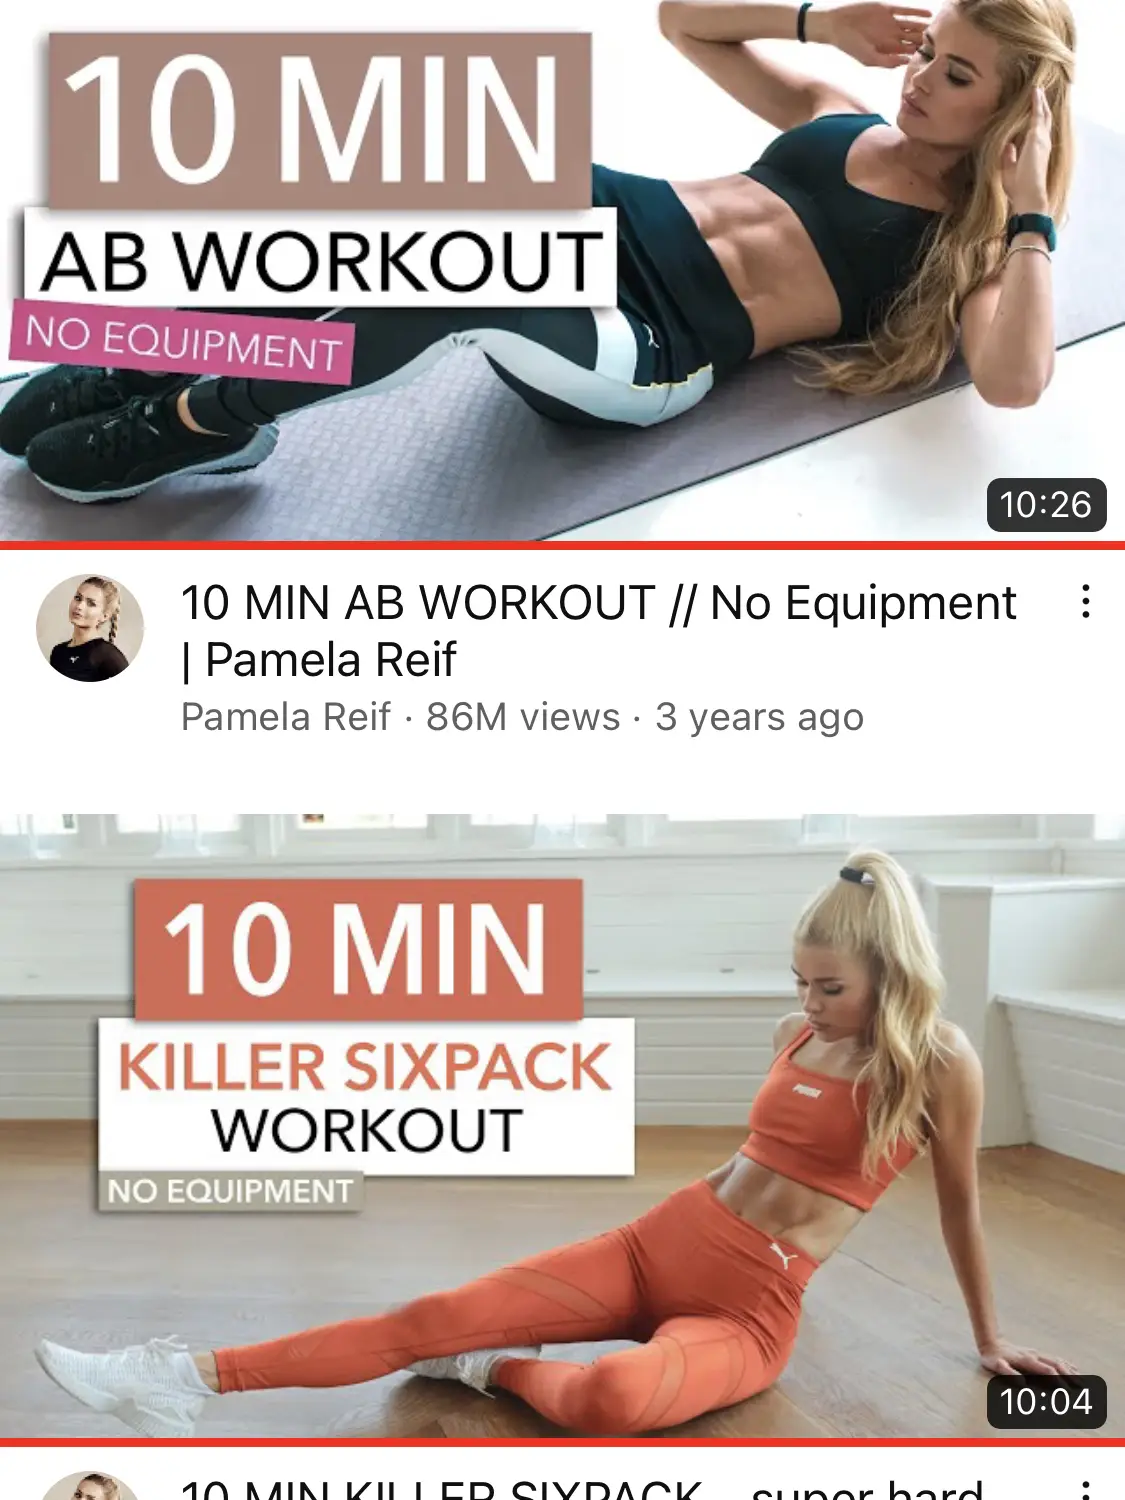 The ab workout for a lazy lazy girl 🤨's images(1)